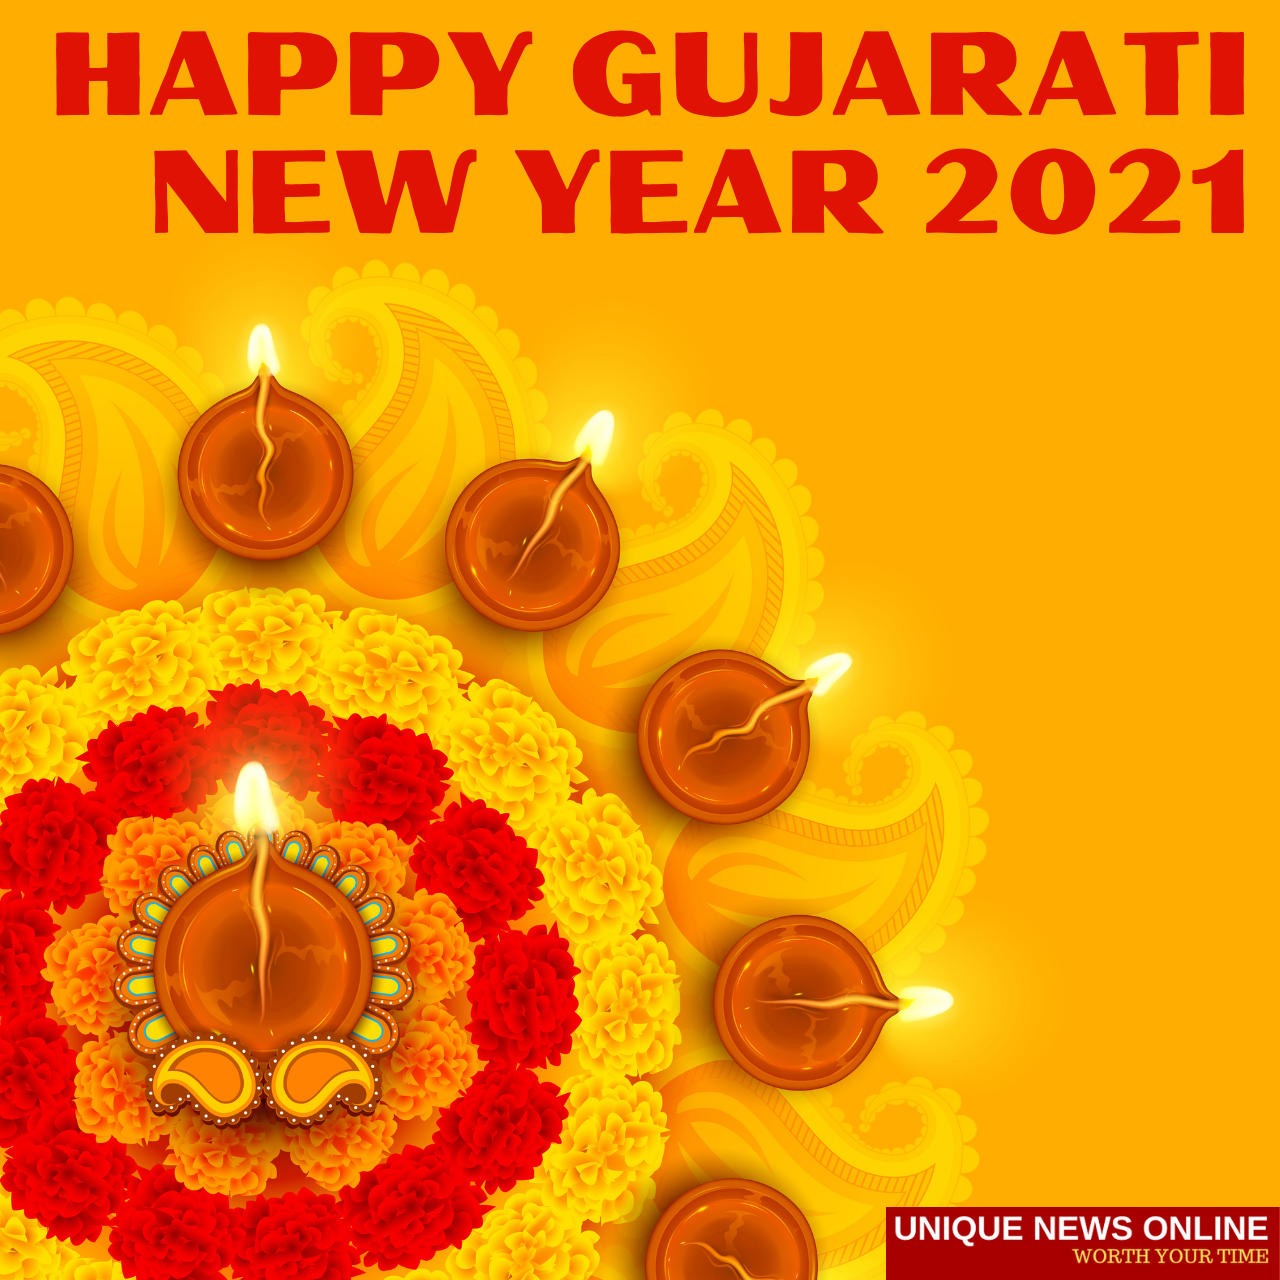 Gujarati New Year 2021 Wishes, Greetings, Quotes, Messages, and Status to greet your Loved Ones